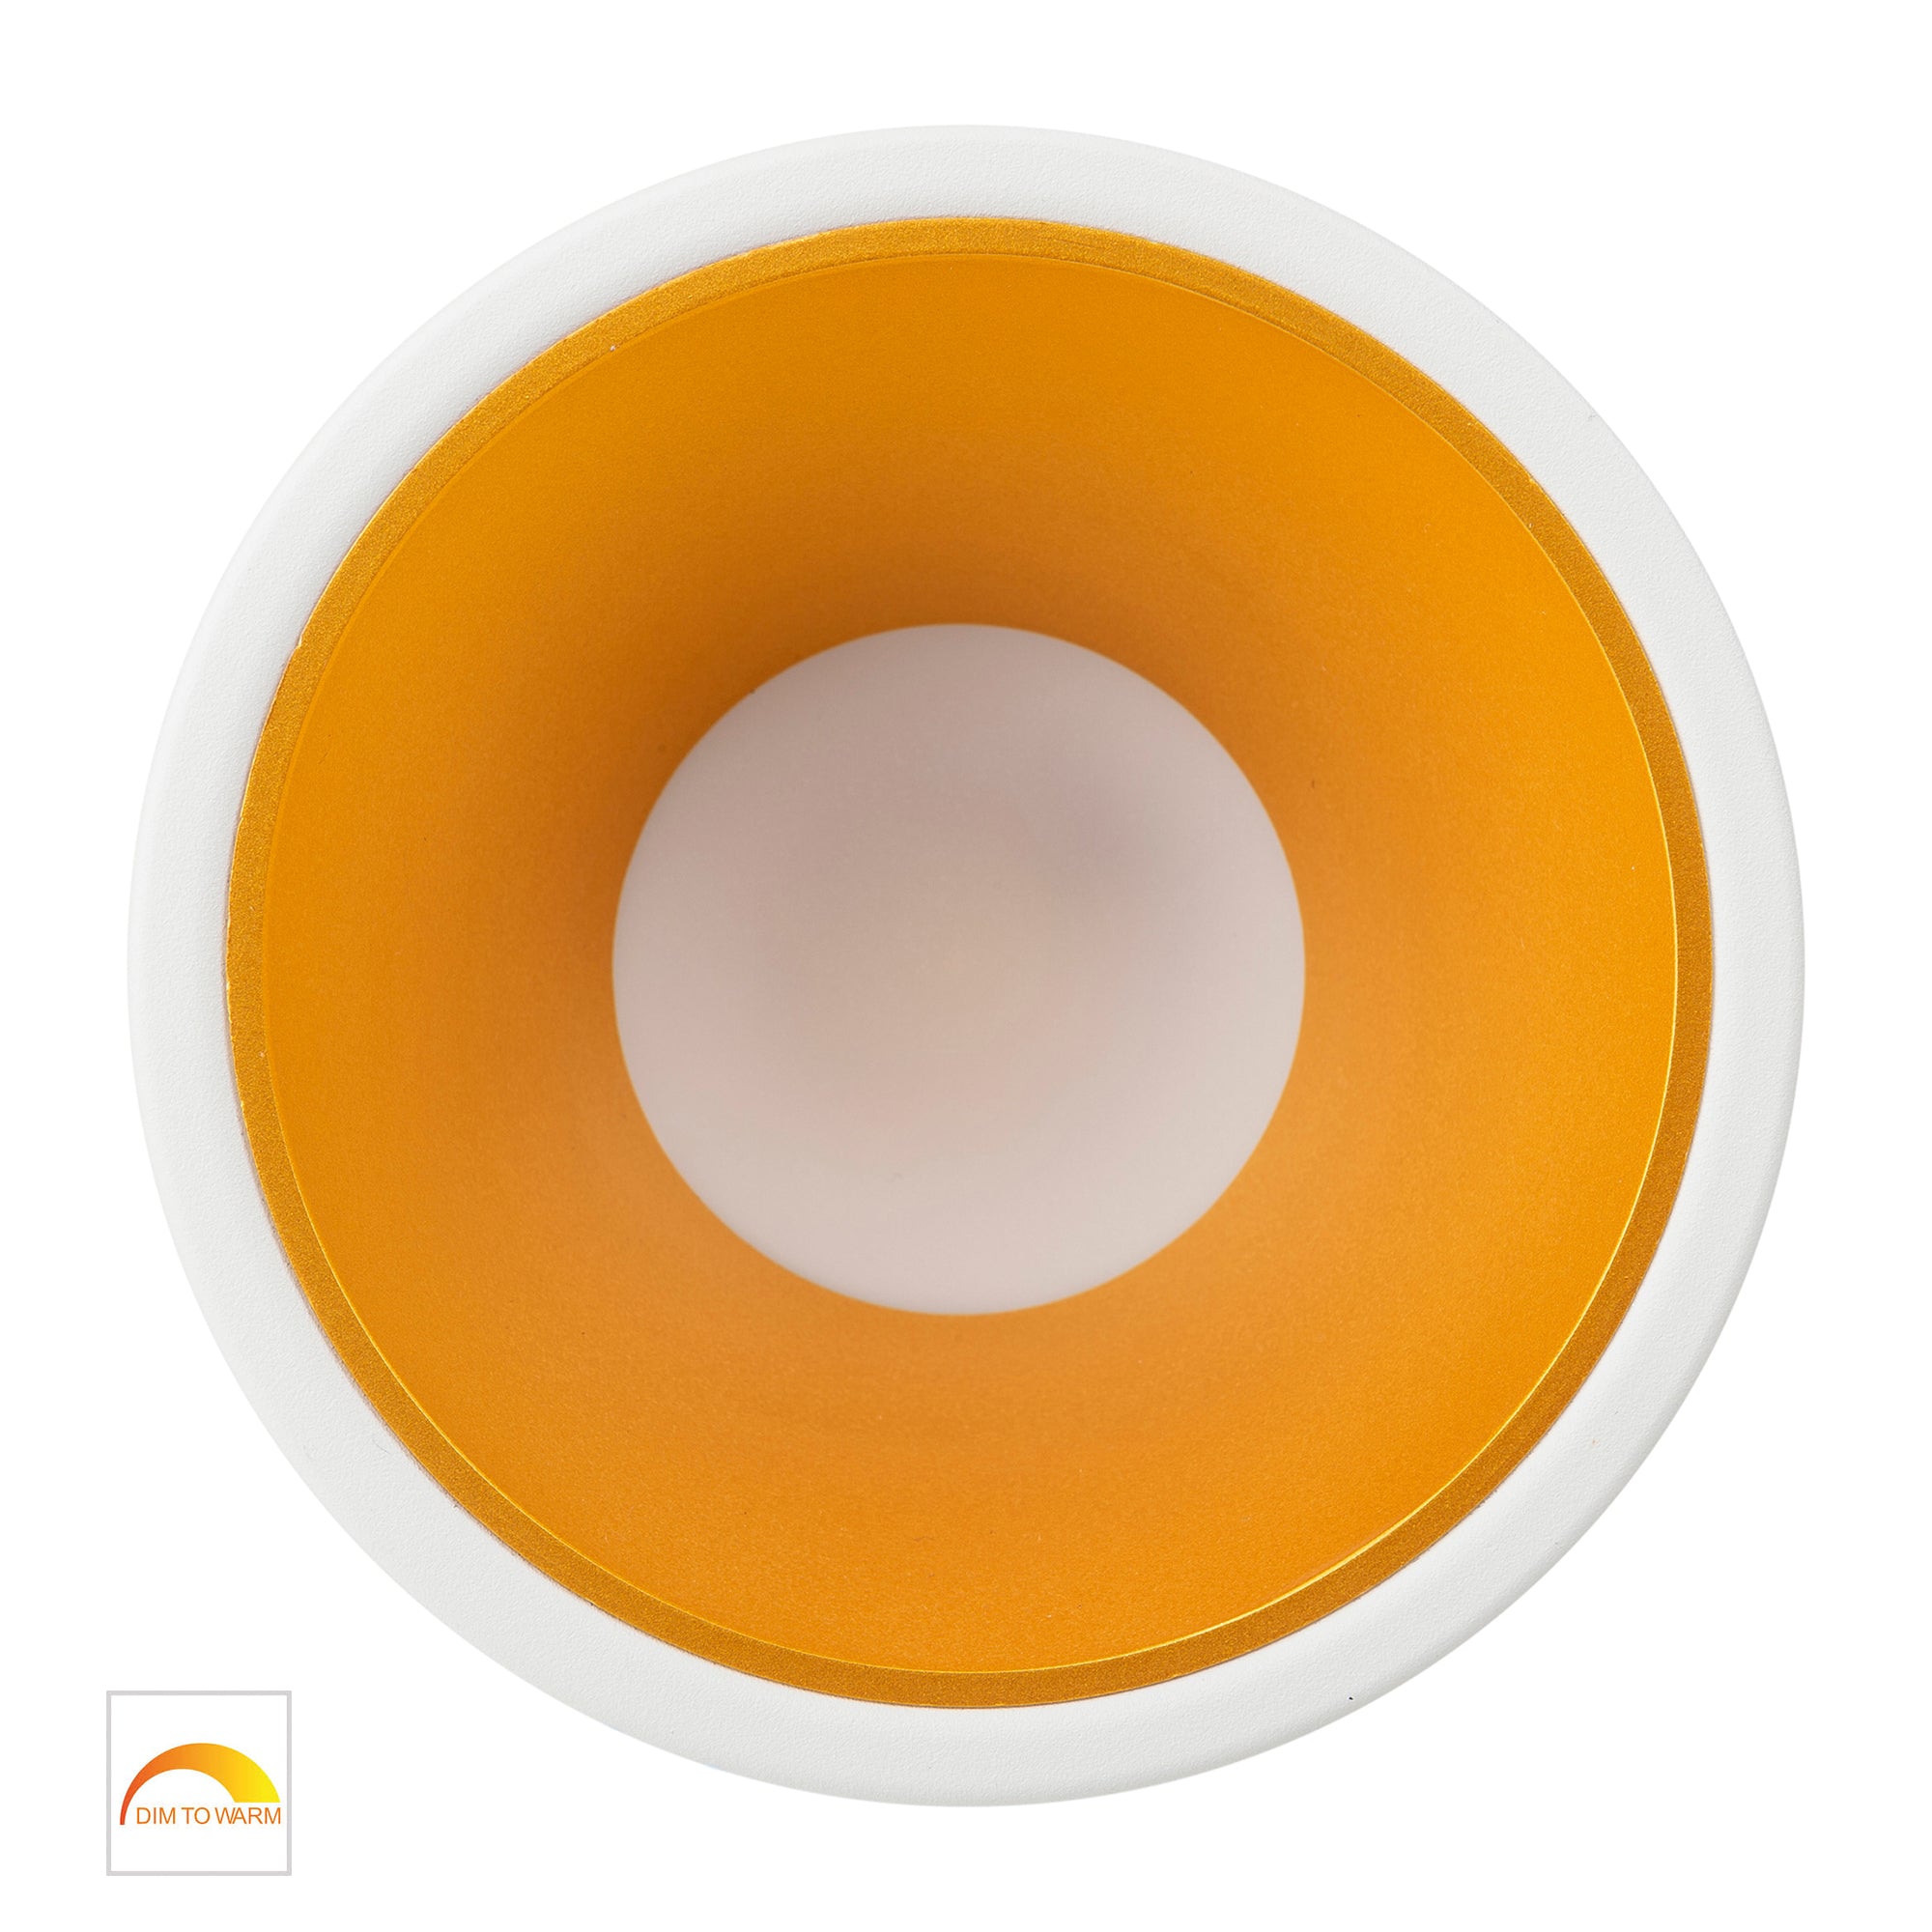 HV5528D2W-WG - Gleam White with Gold Insert Fixed Dim to Warm LED Downlight